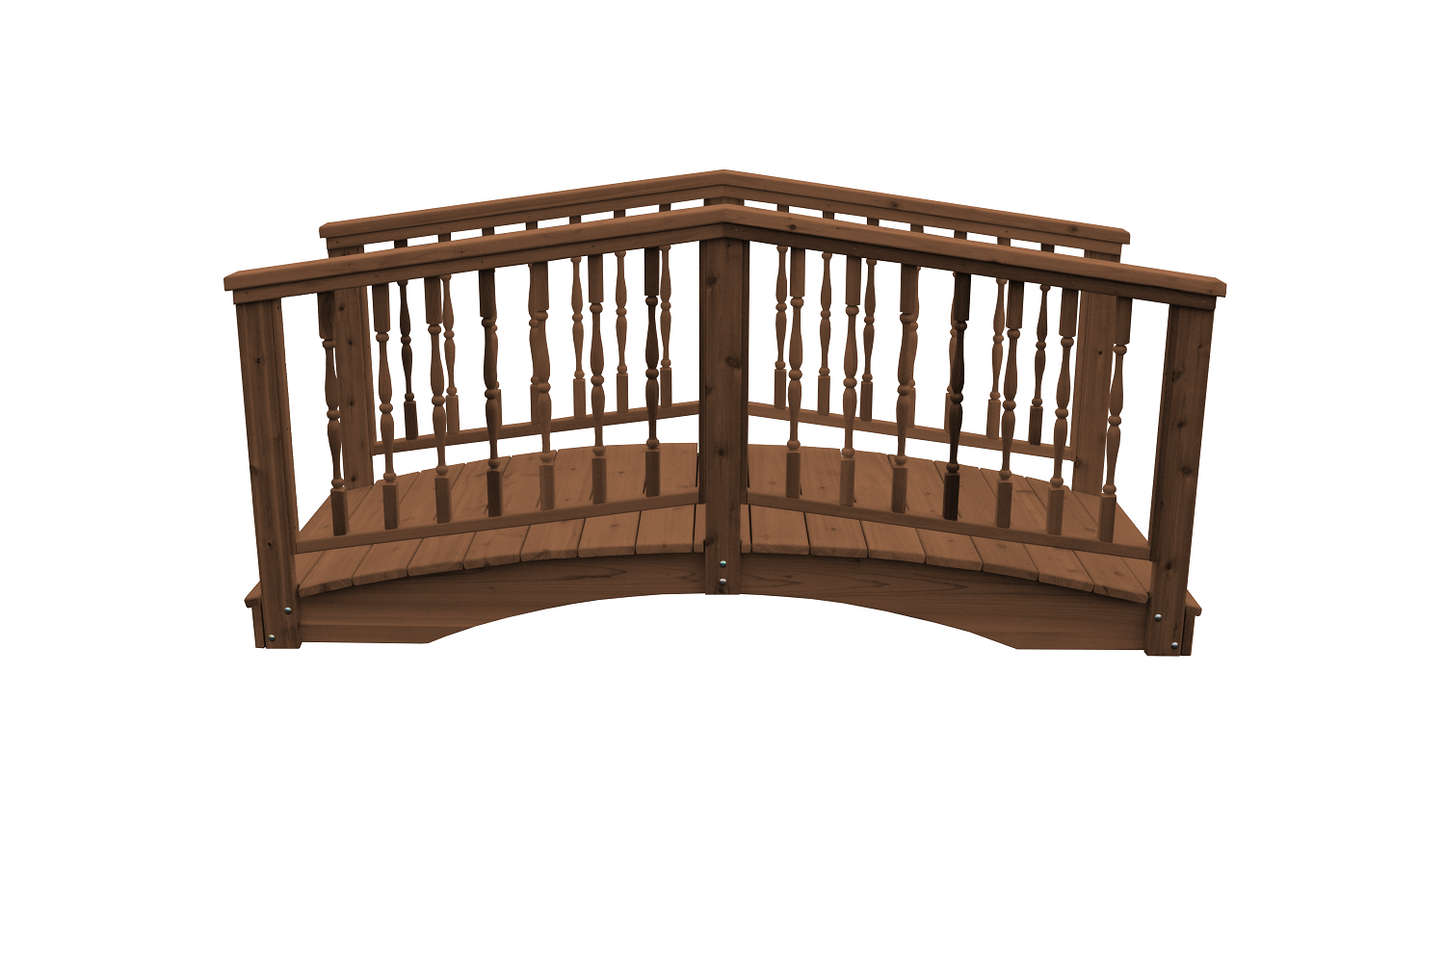 A&L Furniture Co. Western Red Cedar 3' x 6' Spindle Bridge - LEAD TIME TO SHIP 2 WEEKS